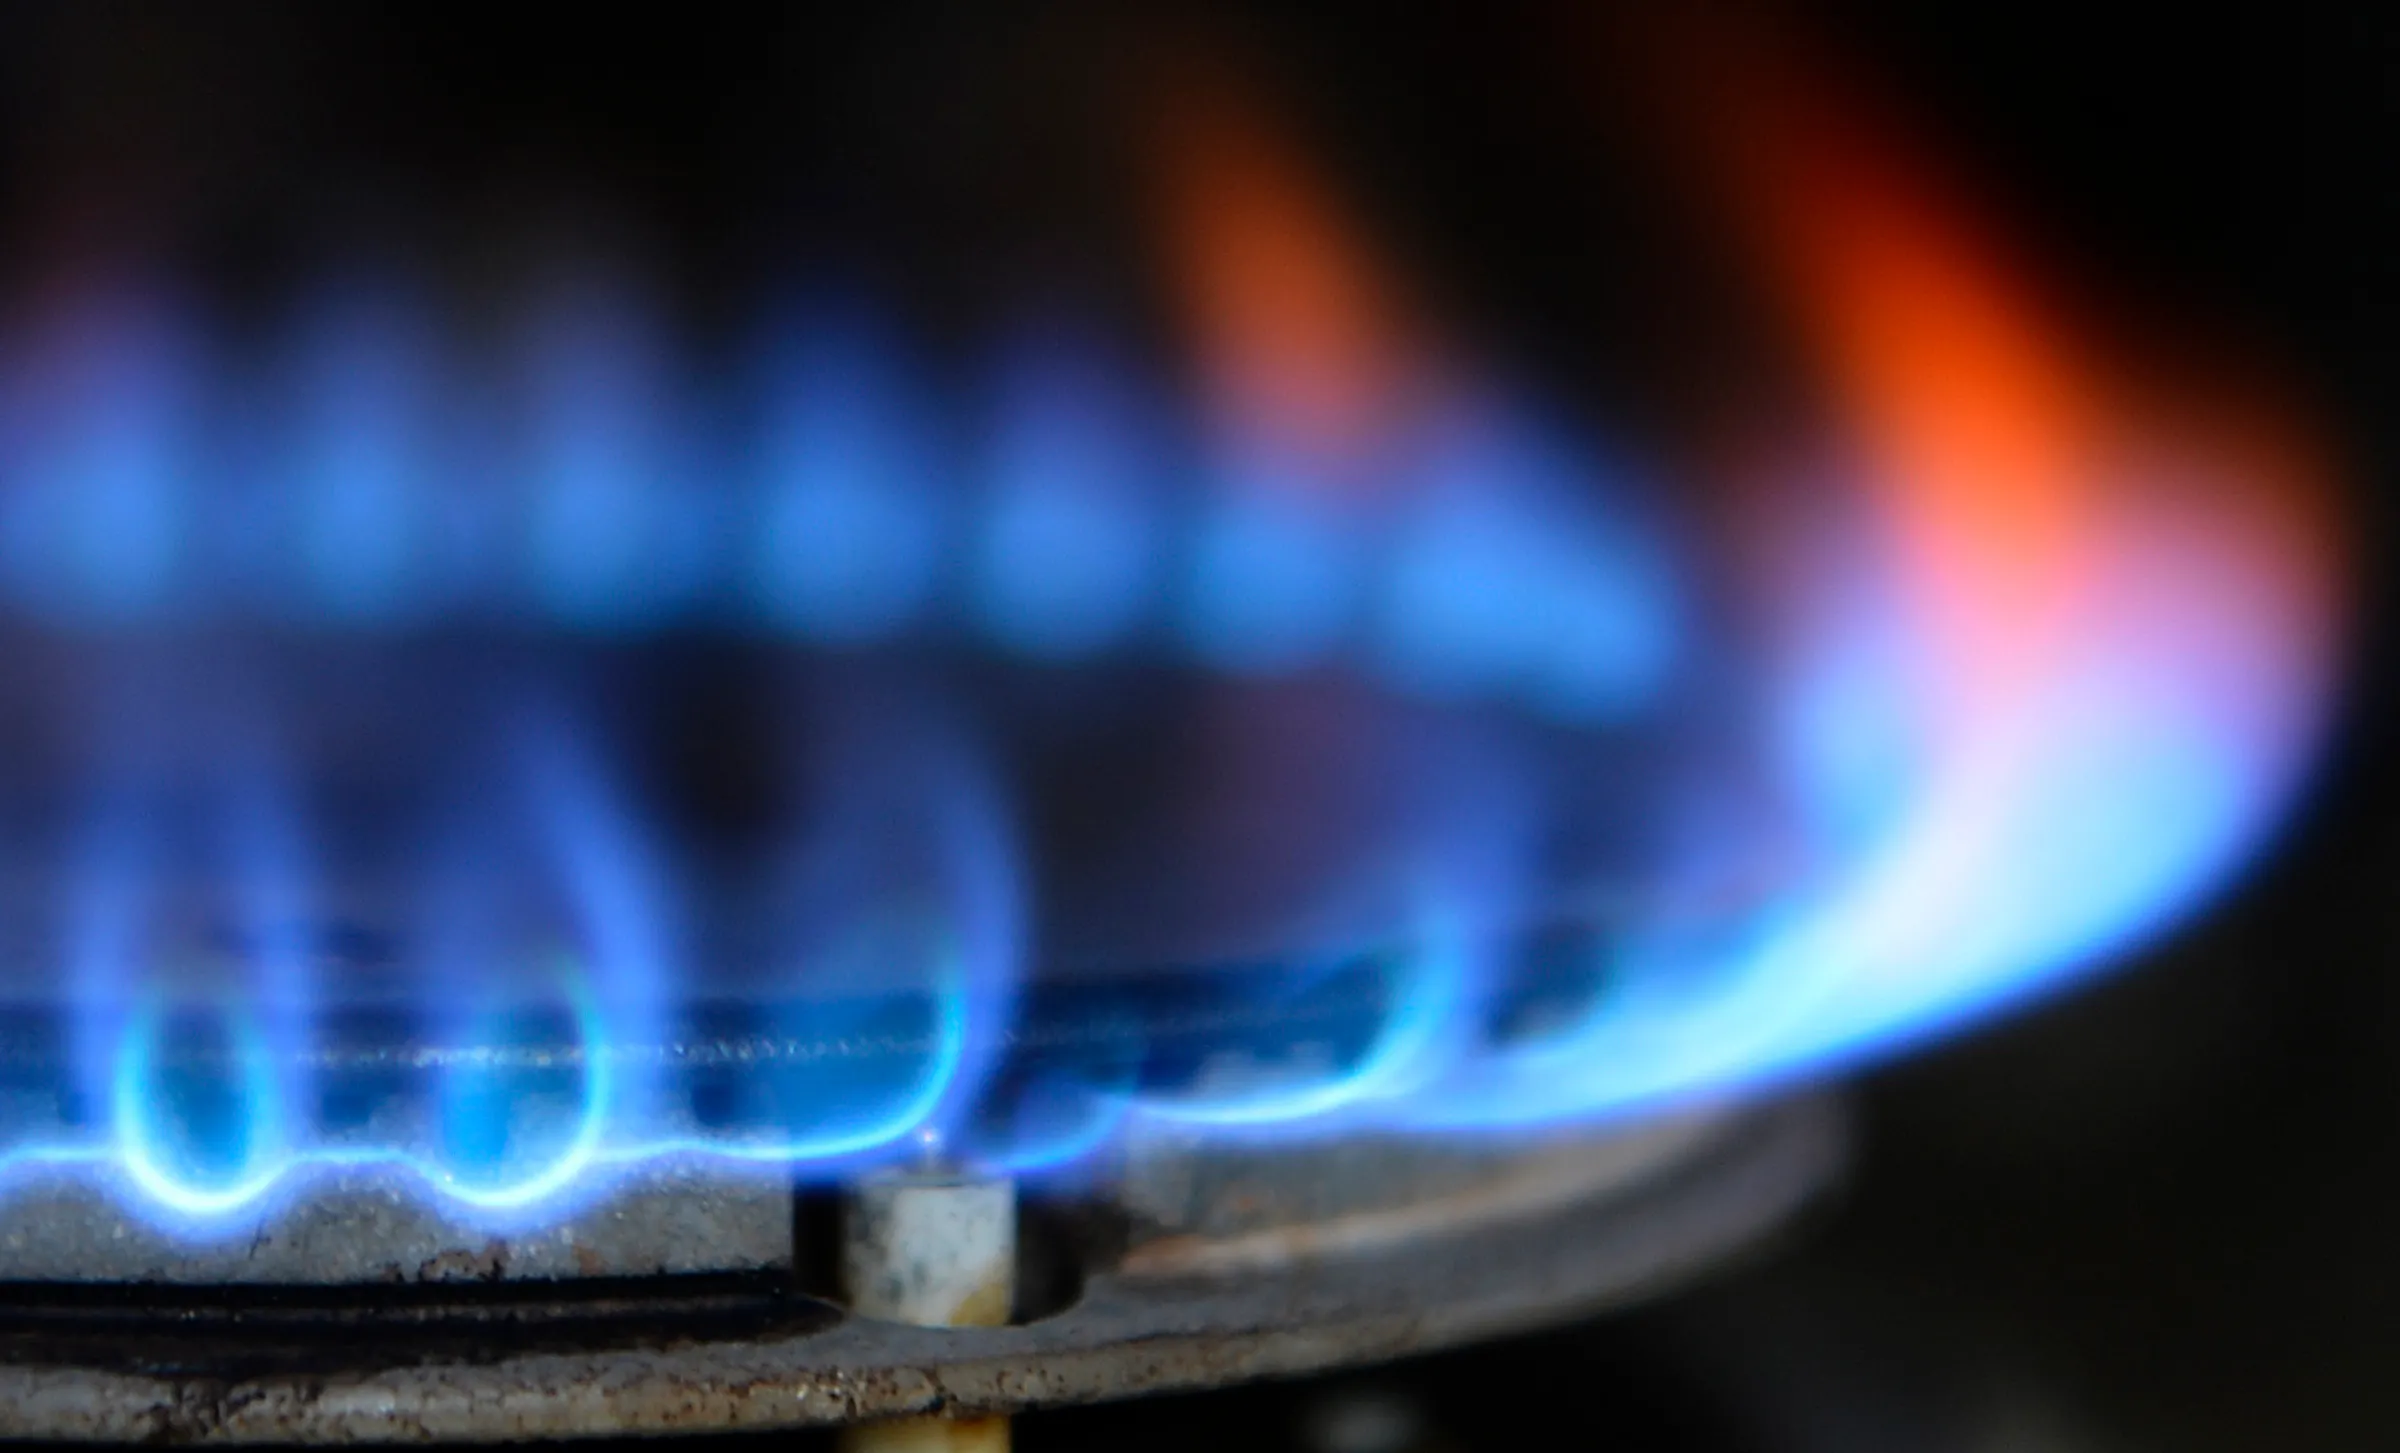 Blue and orange flames from a gas cooker